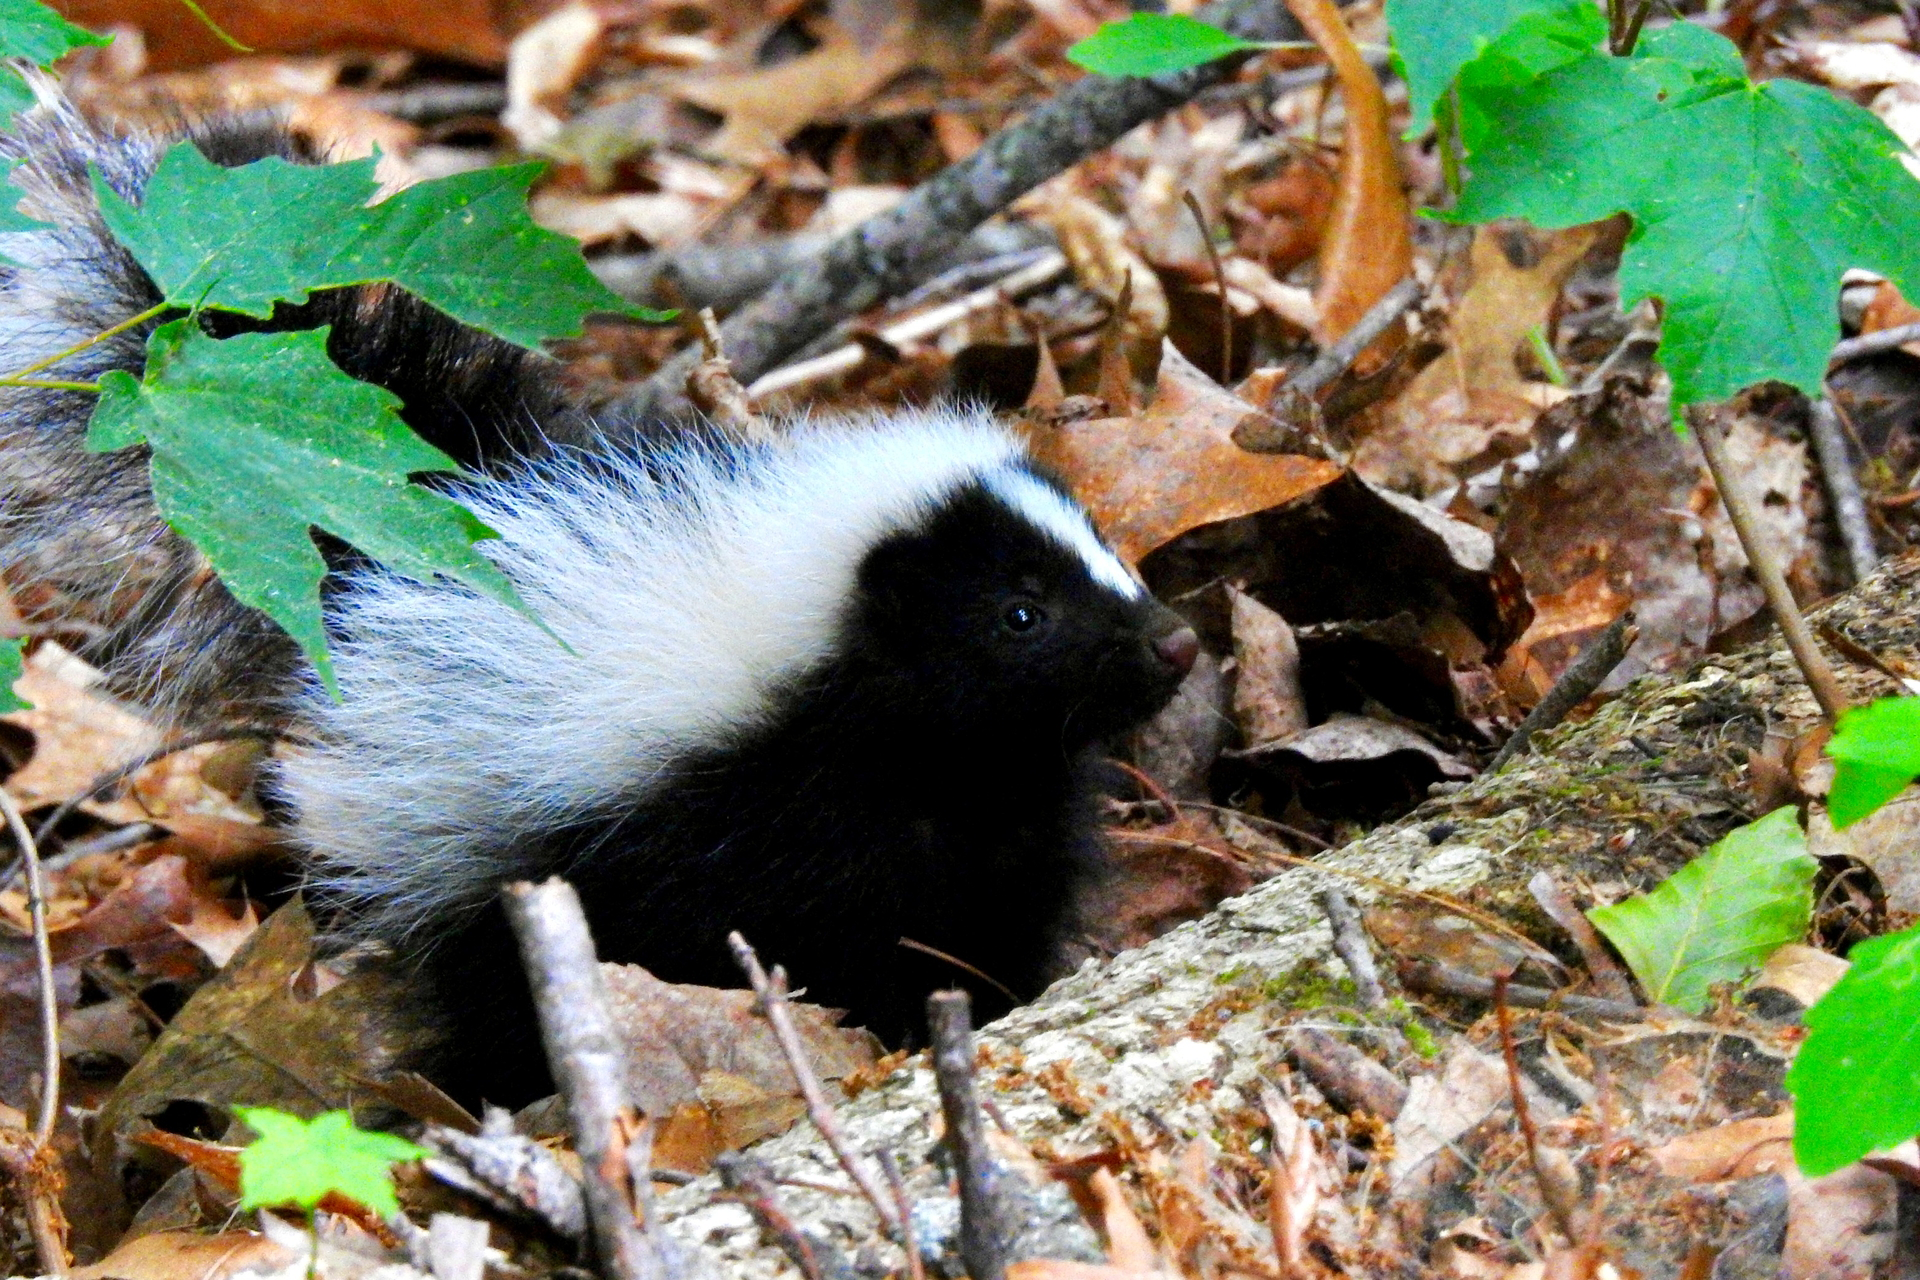 A small skunk wandering on through brown leaves and fallen logs.